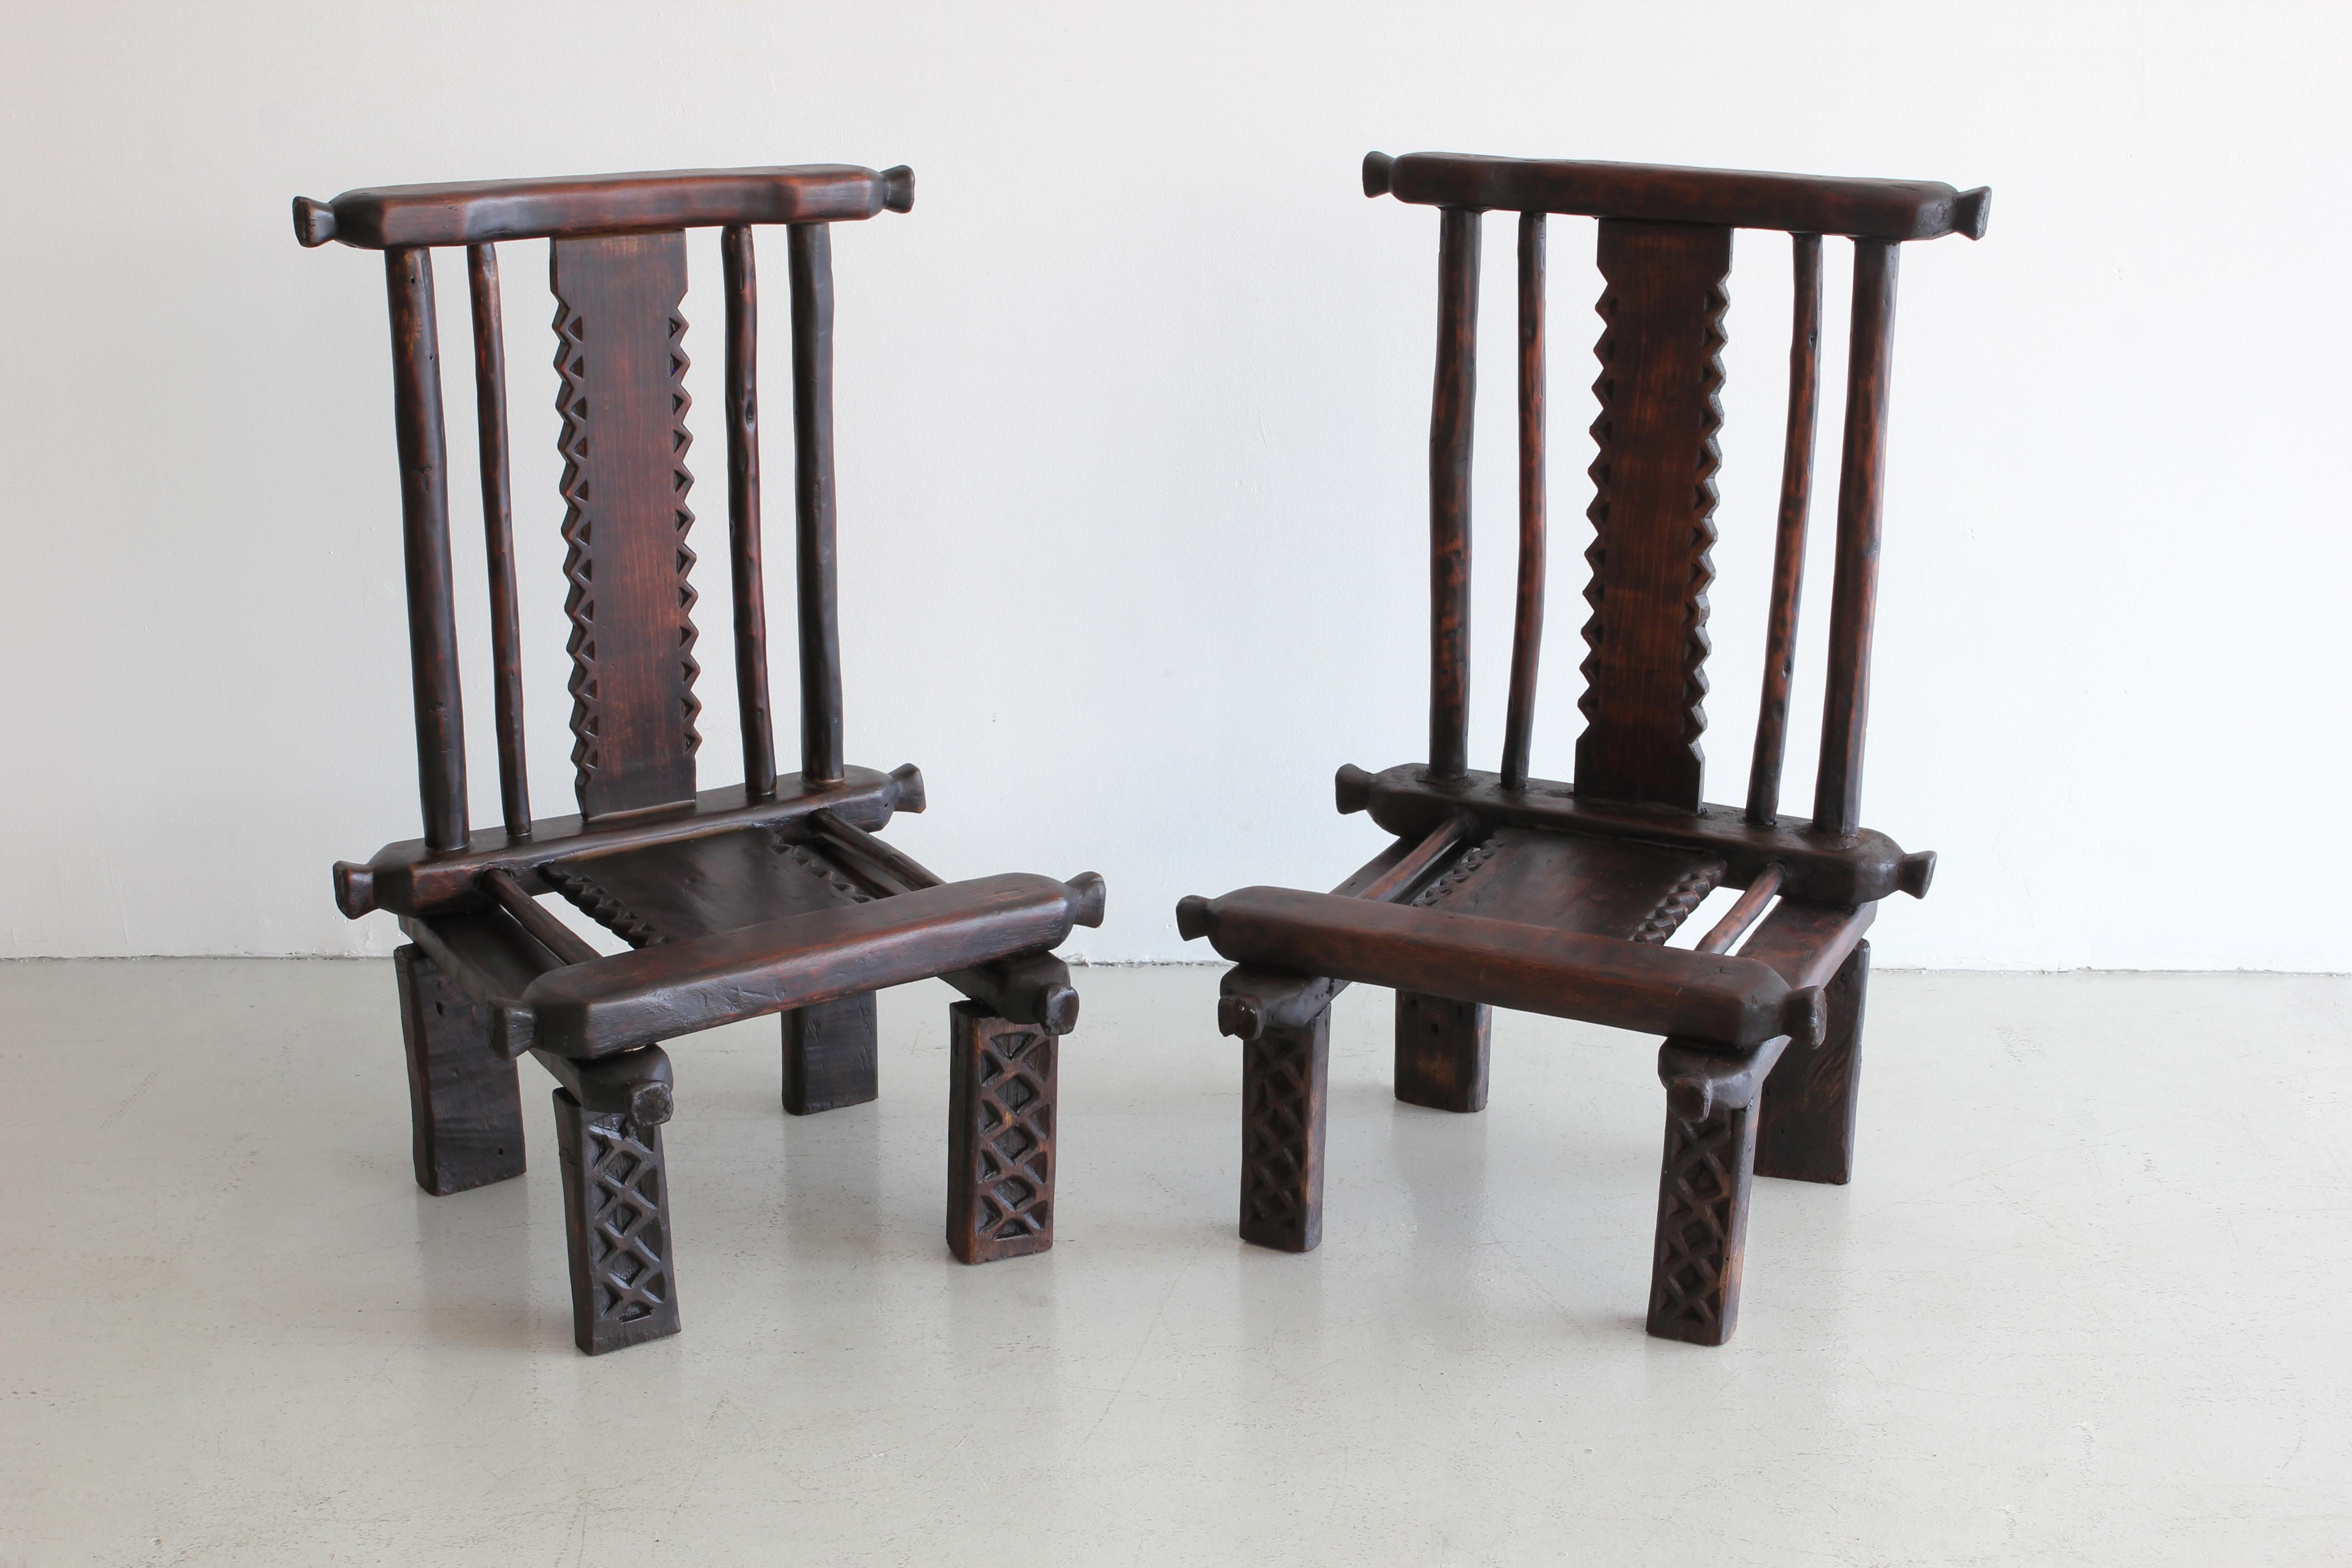 Pair of carved African chairs with ornate detail and fantastic shape and patina.